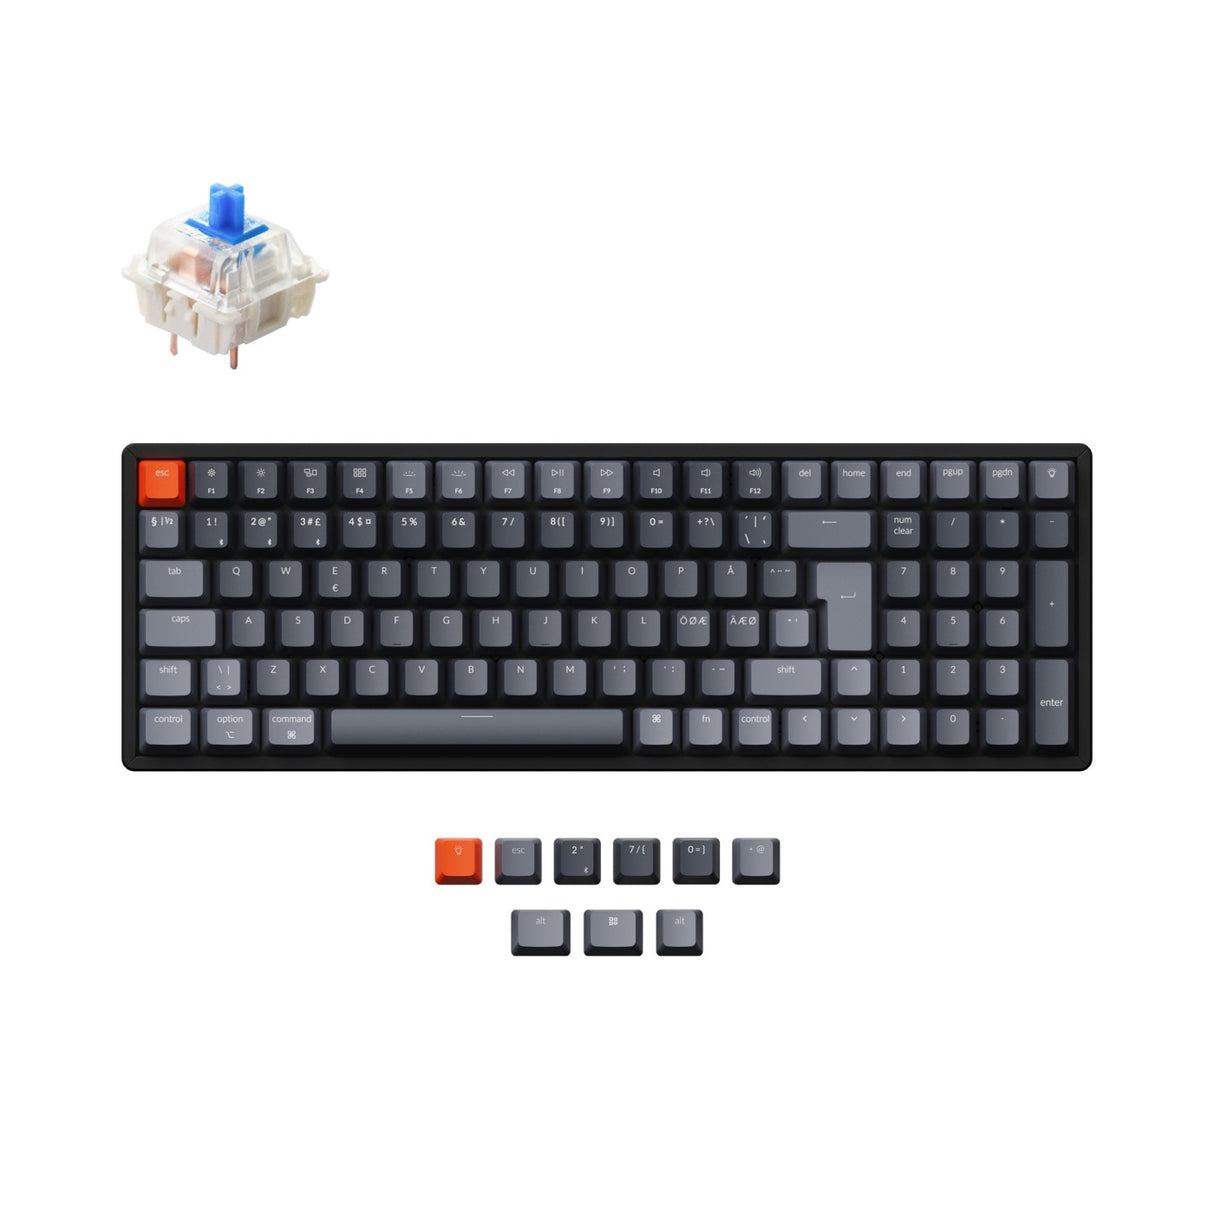 Keychron K4 Wireless Mechanical Keyboard Nordic ISO Layout Version 2 Gateron Blue Switch RGB Backlight Hot Swappable